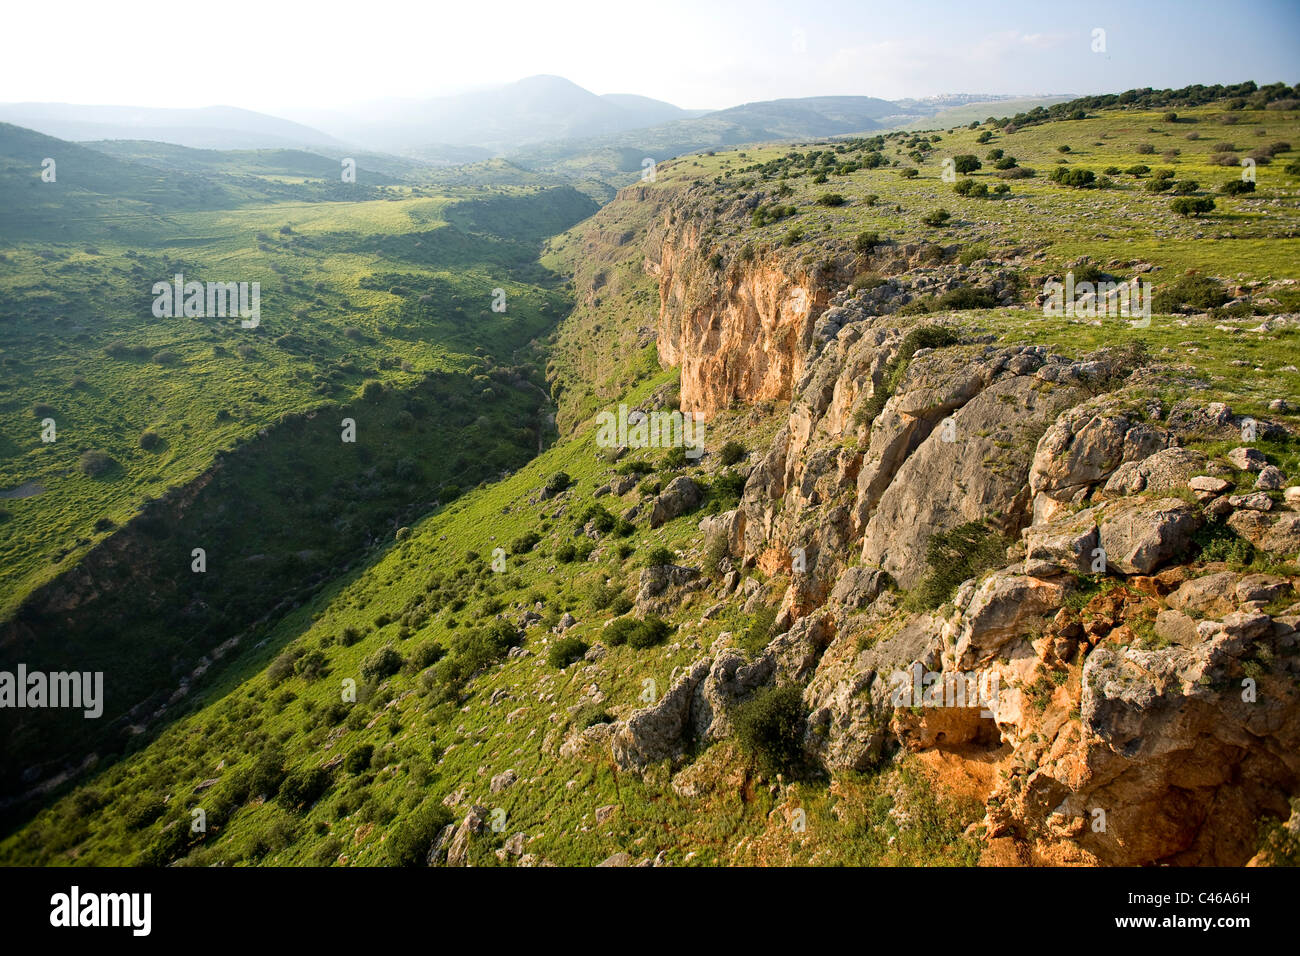 Aerial photograph of the Amud stream in the Galilee Stock Photo